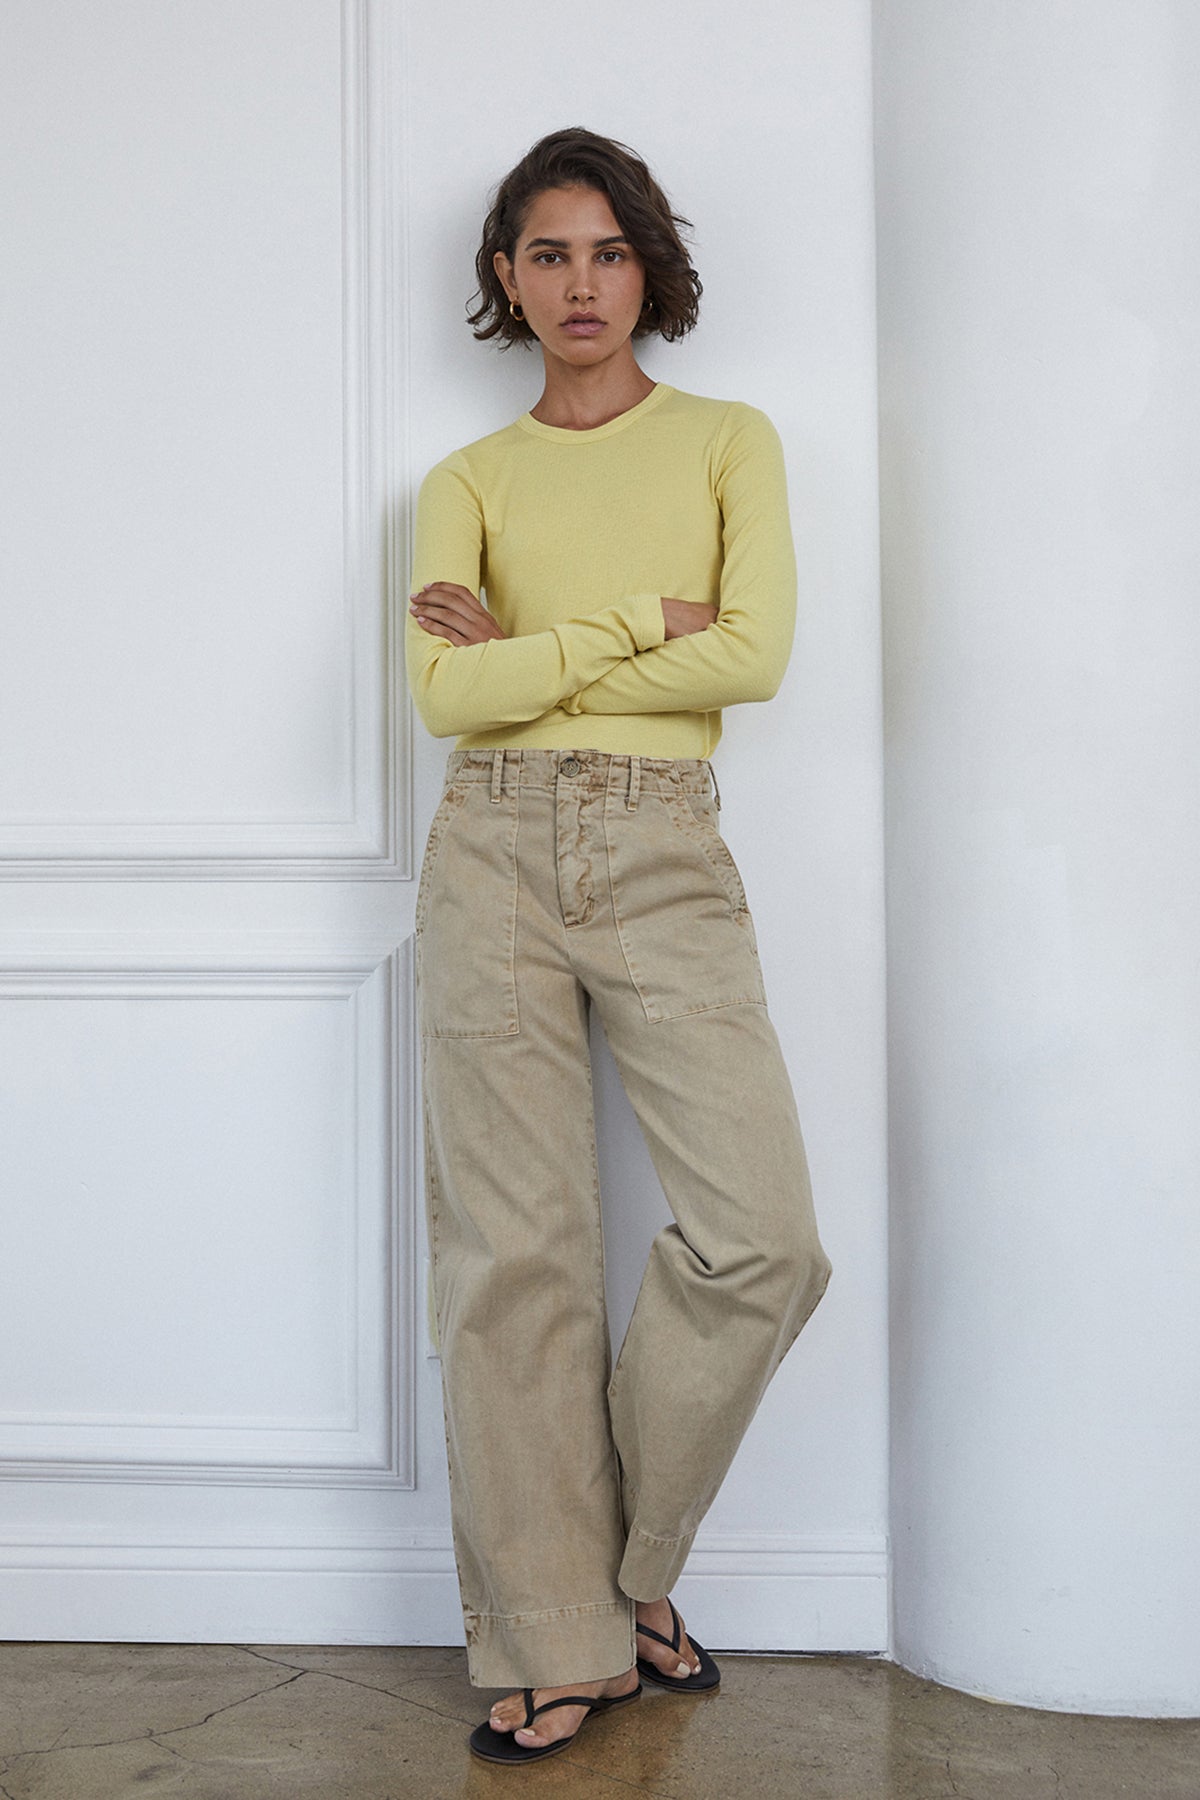 Ventura Pant in putty with Camino tee in lemon tucked full length front-26007117299905